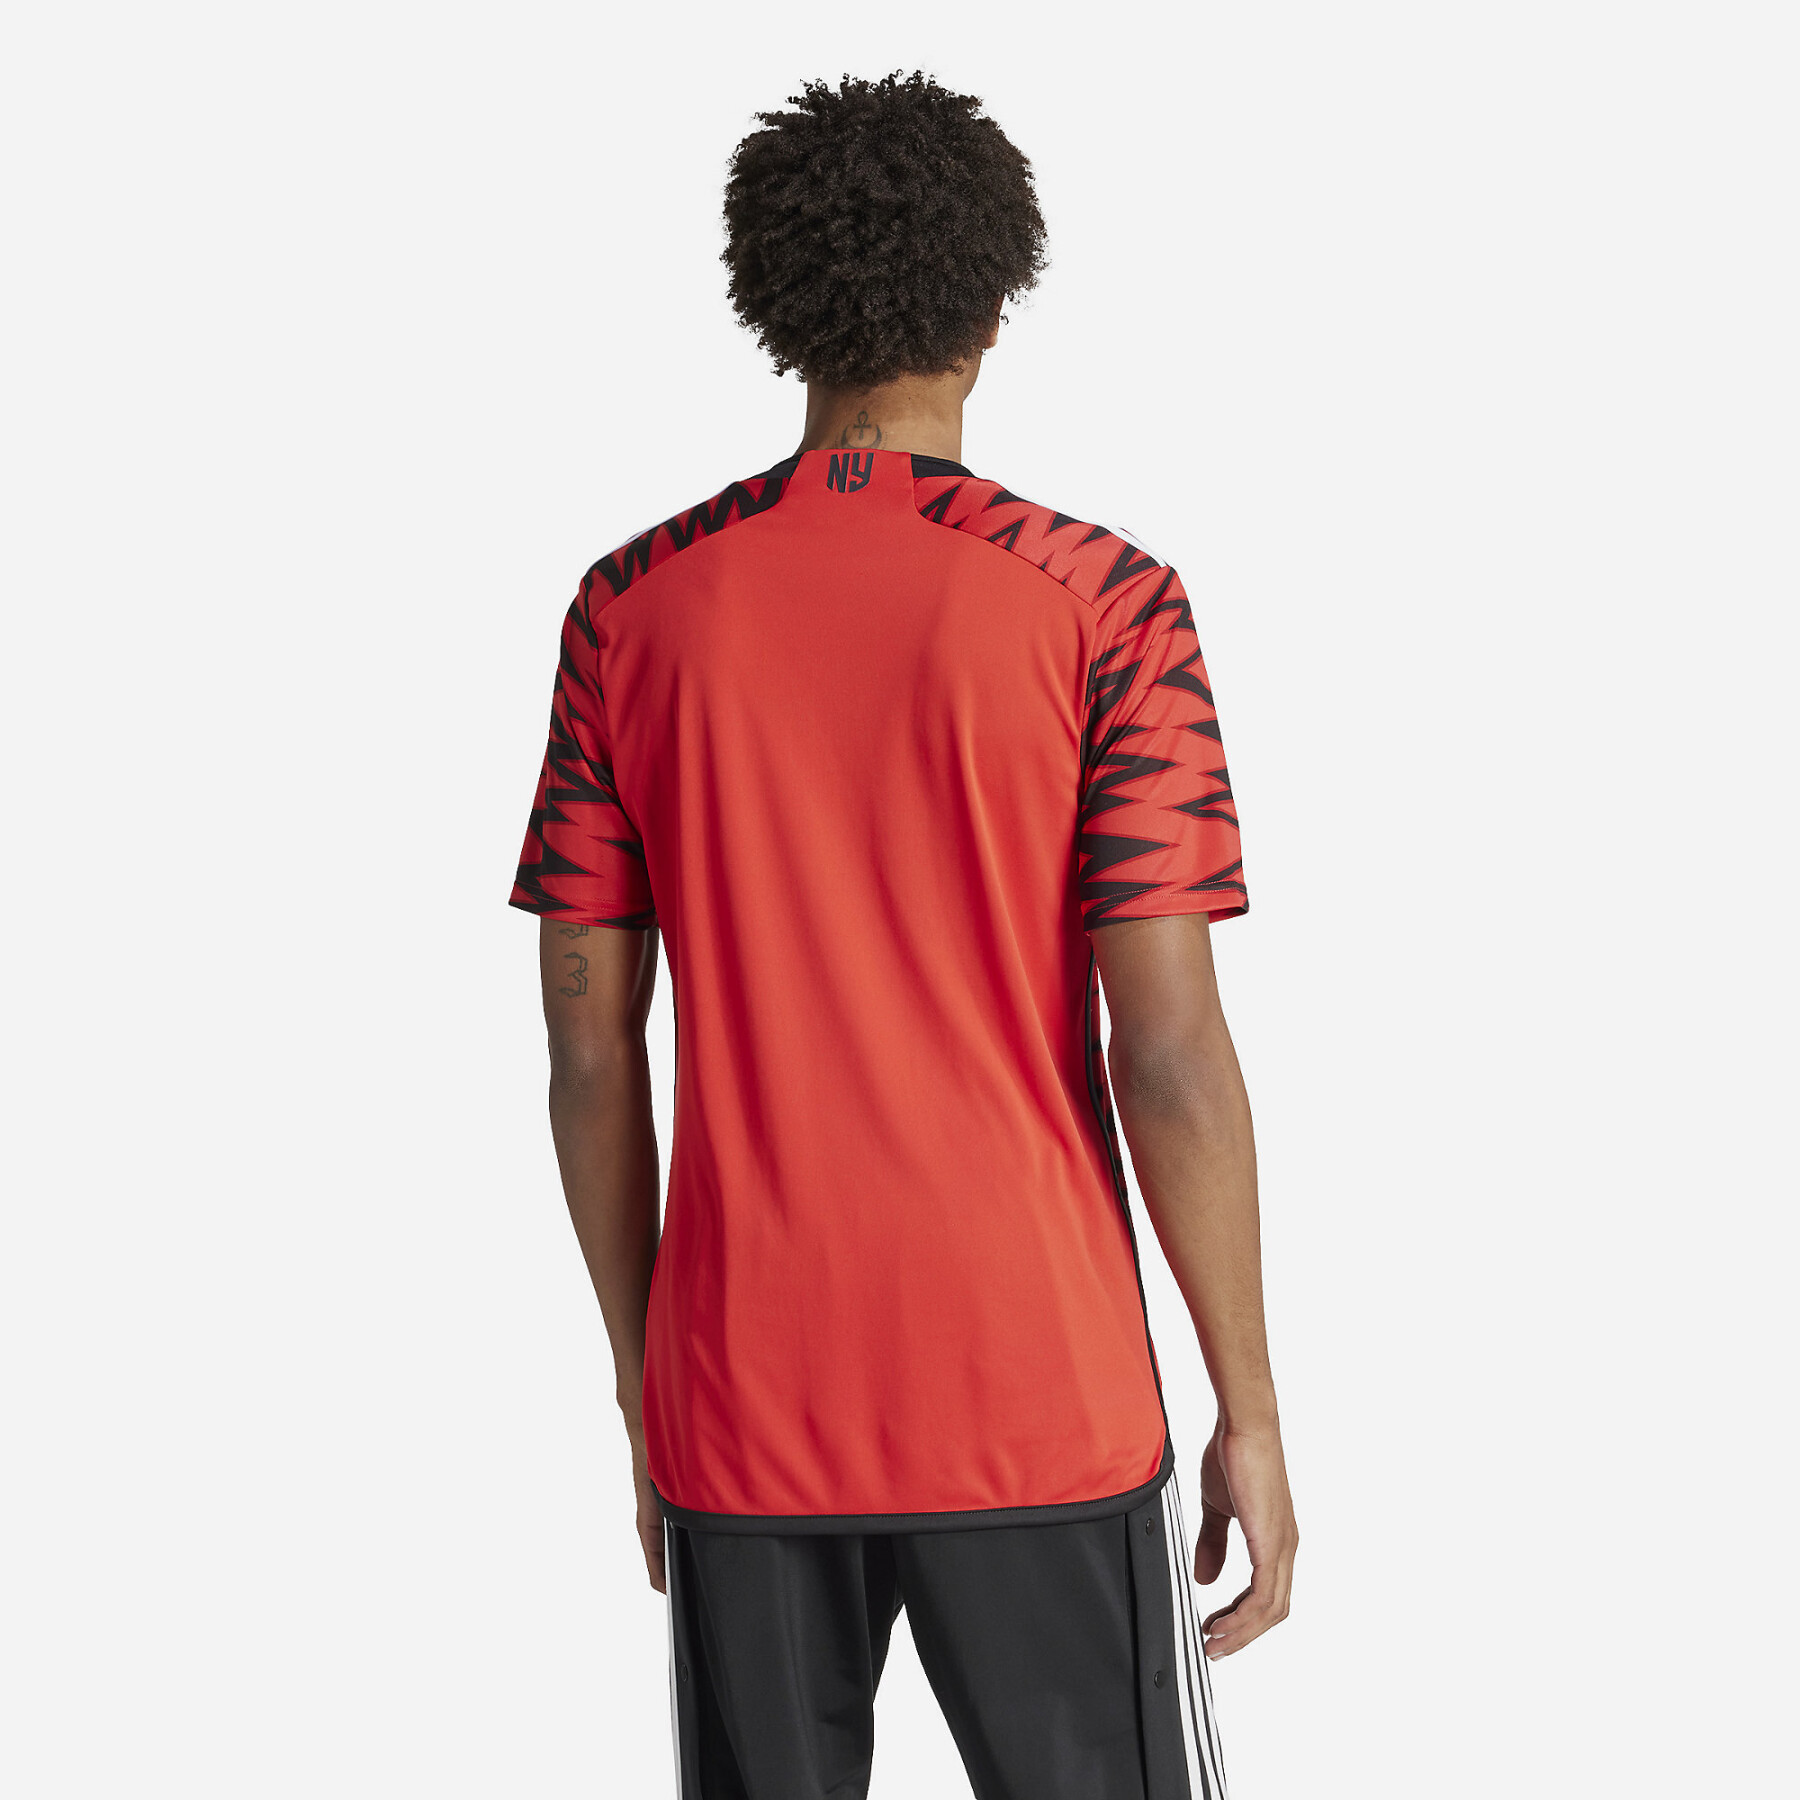 Home jersey adidas RB